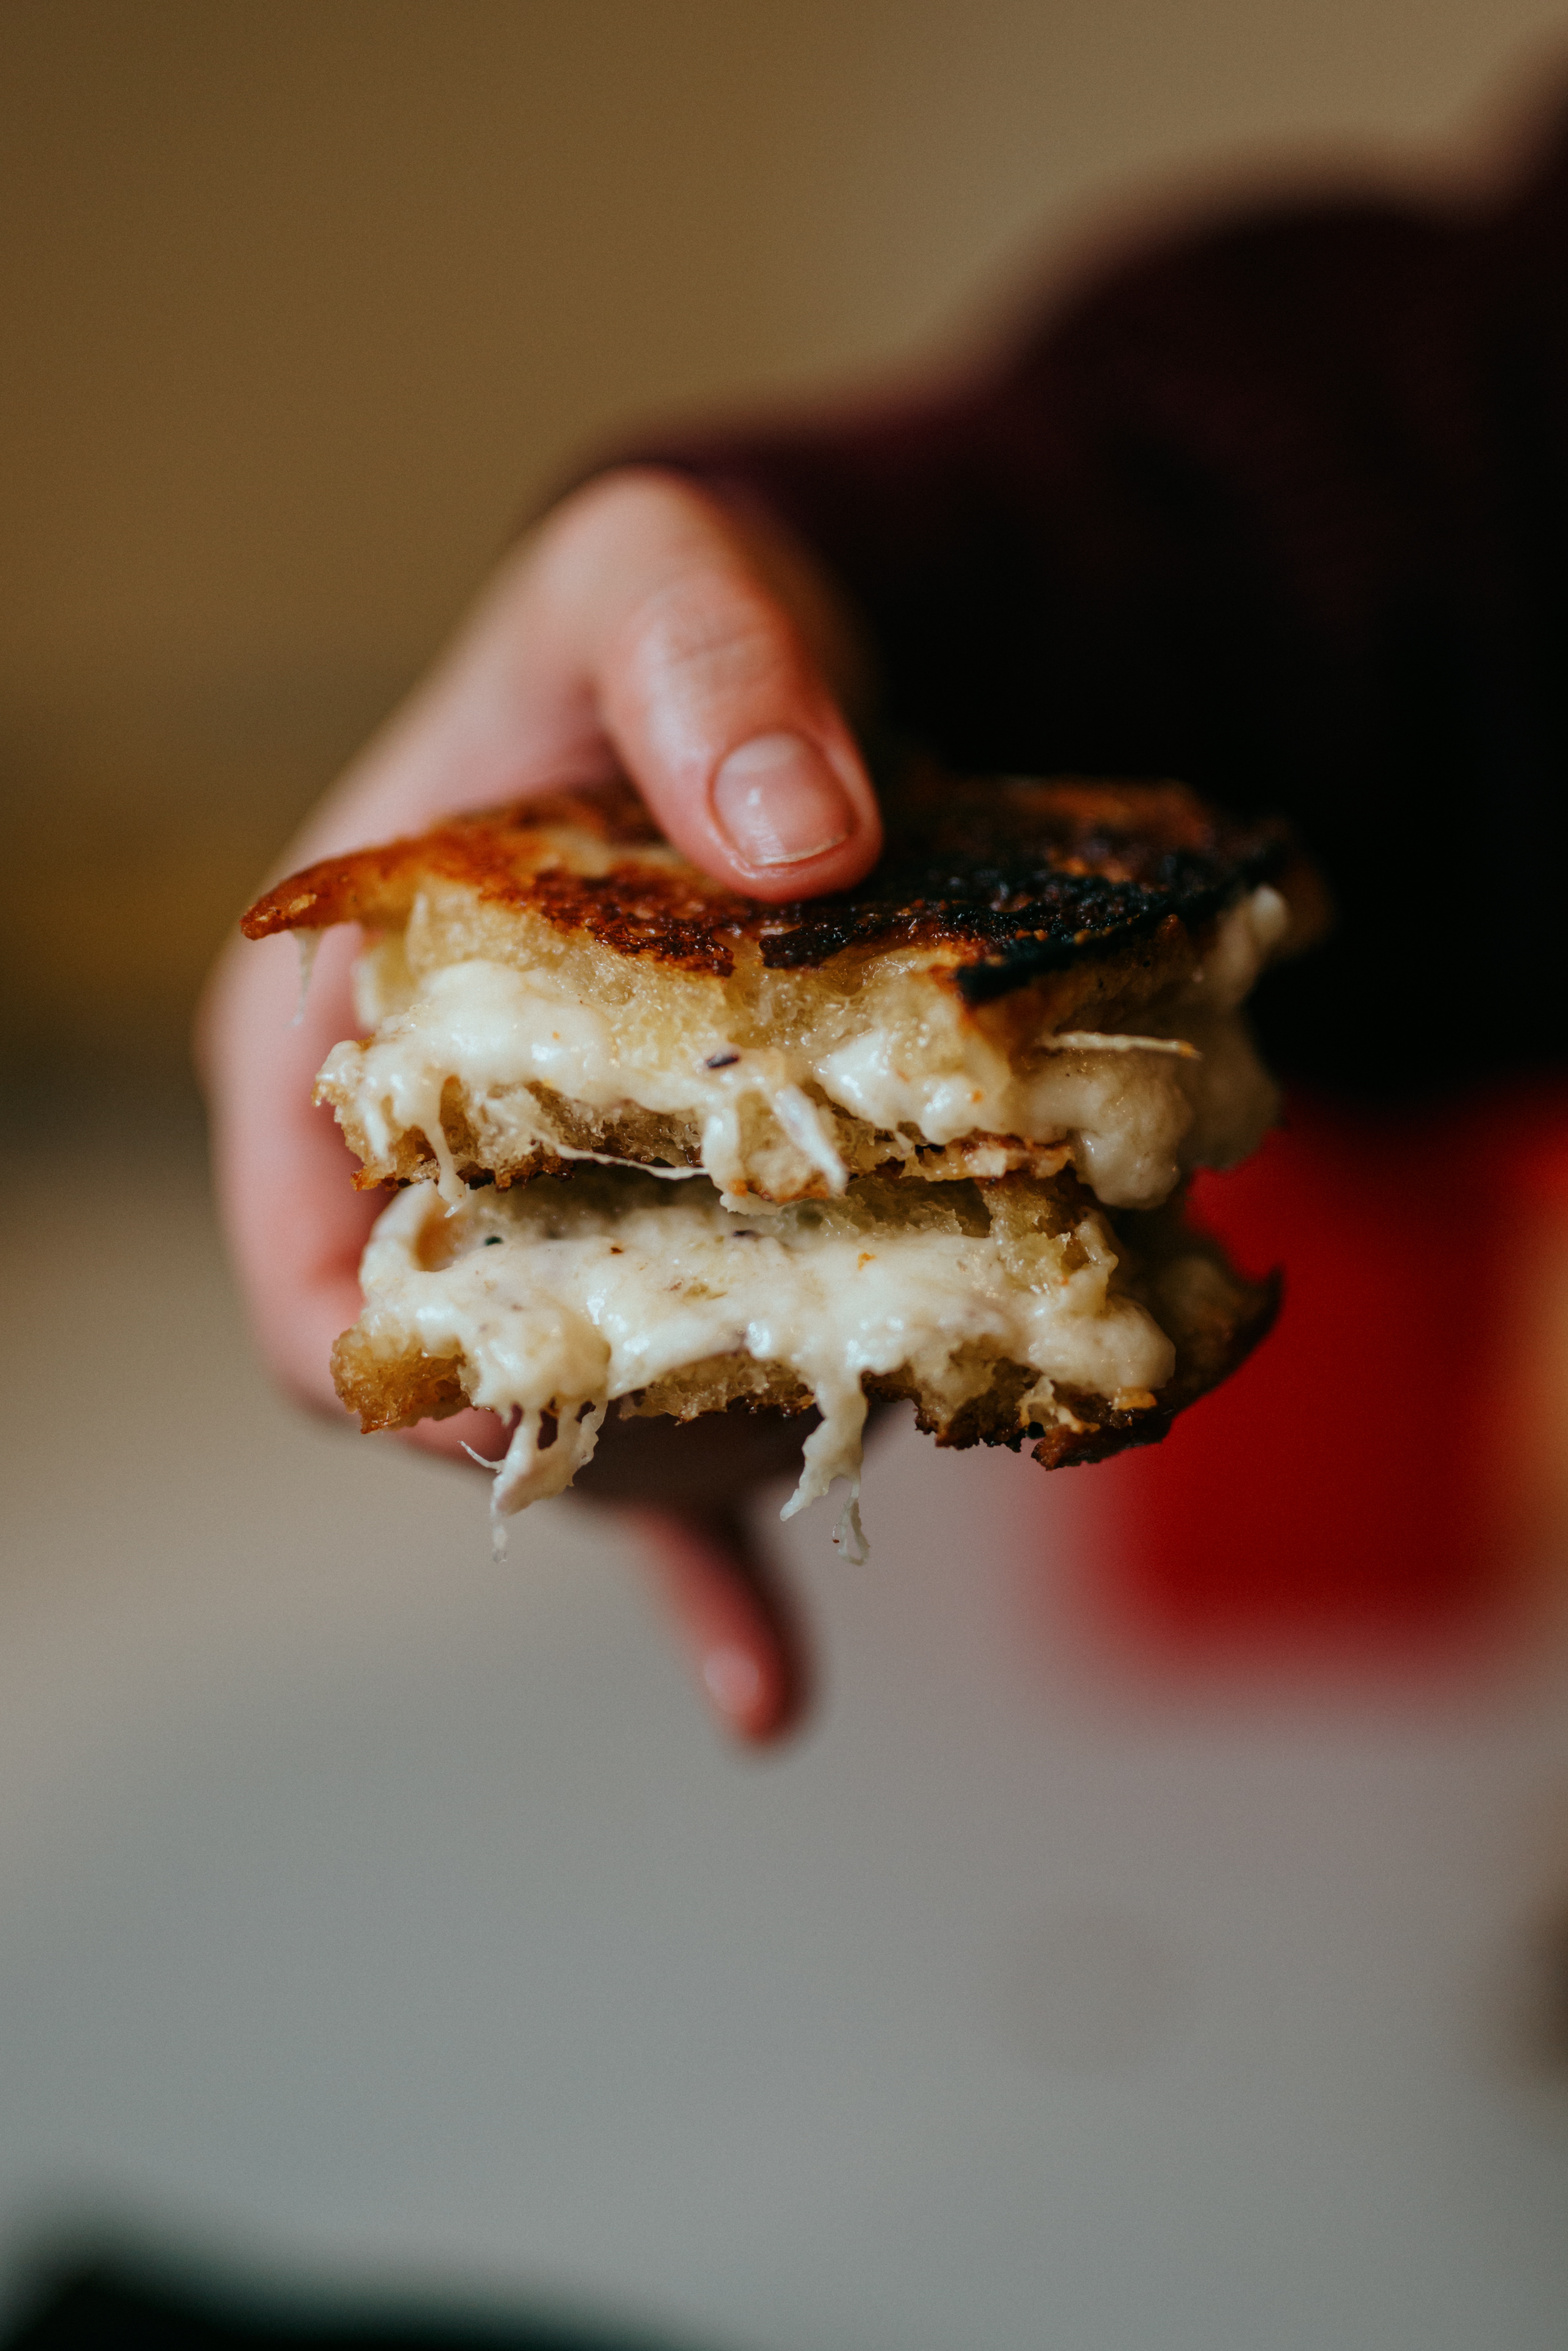 grilled cheese, burger, food images & pictures, sweets, brown backgrounds, people images & pictures, human, finger, bread